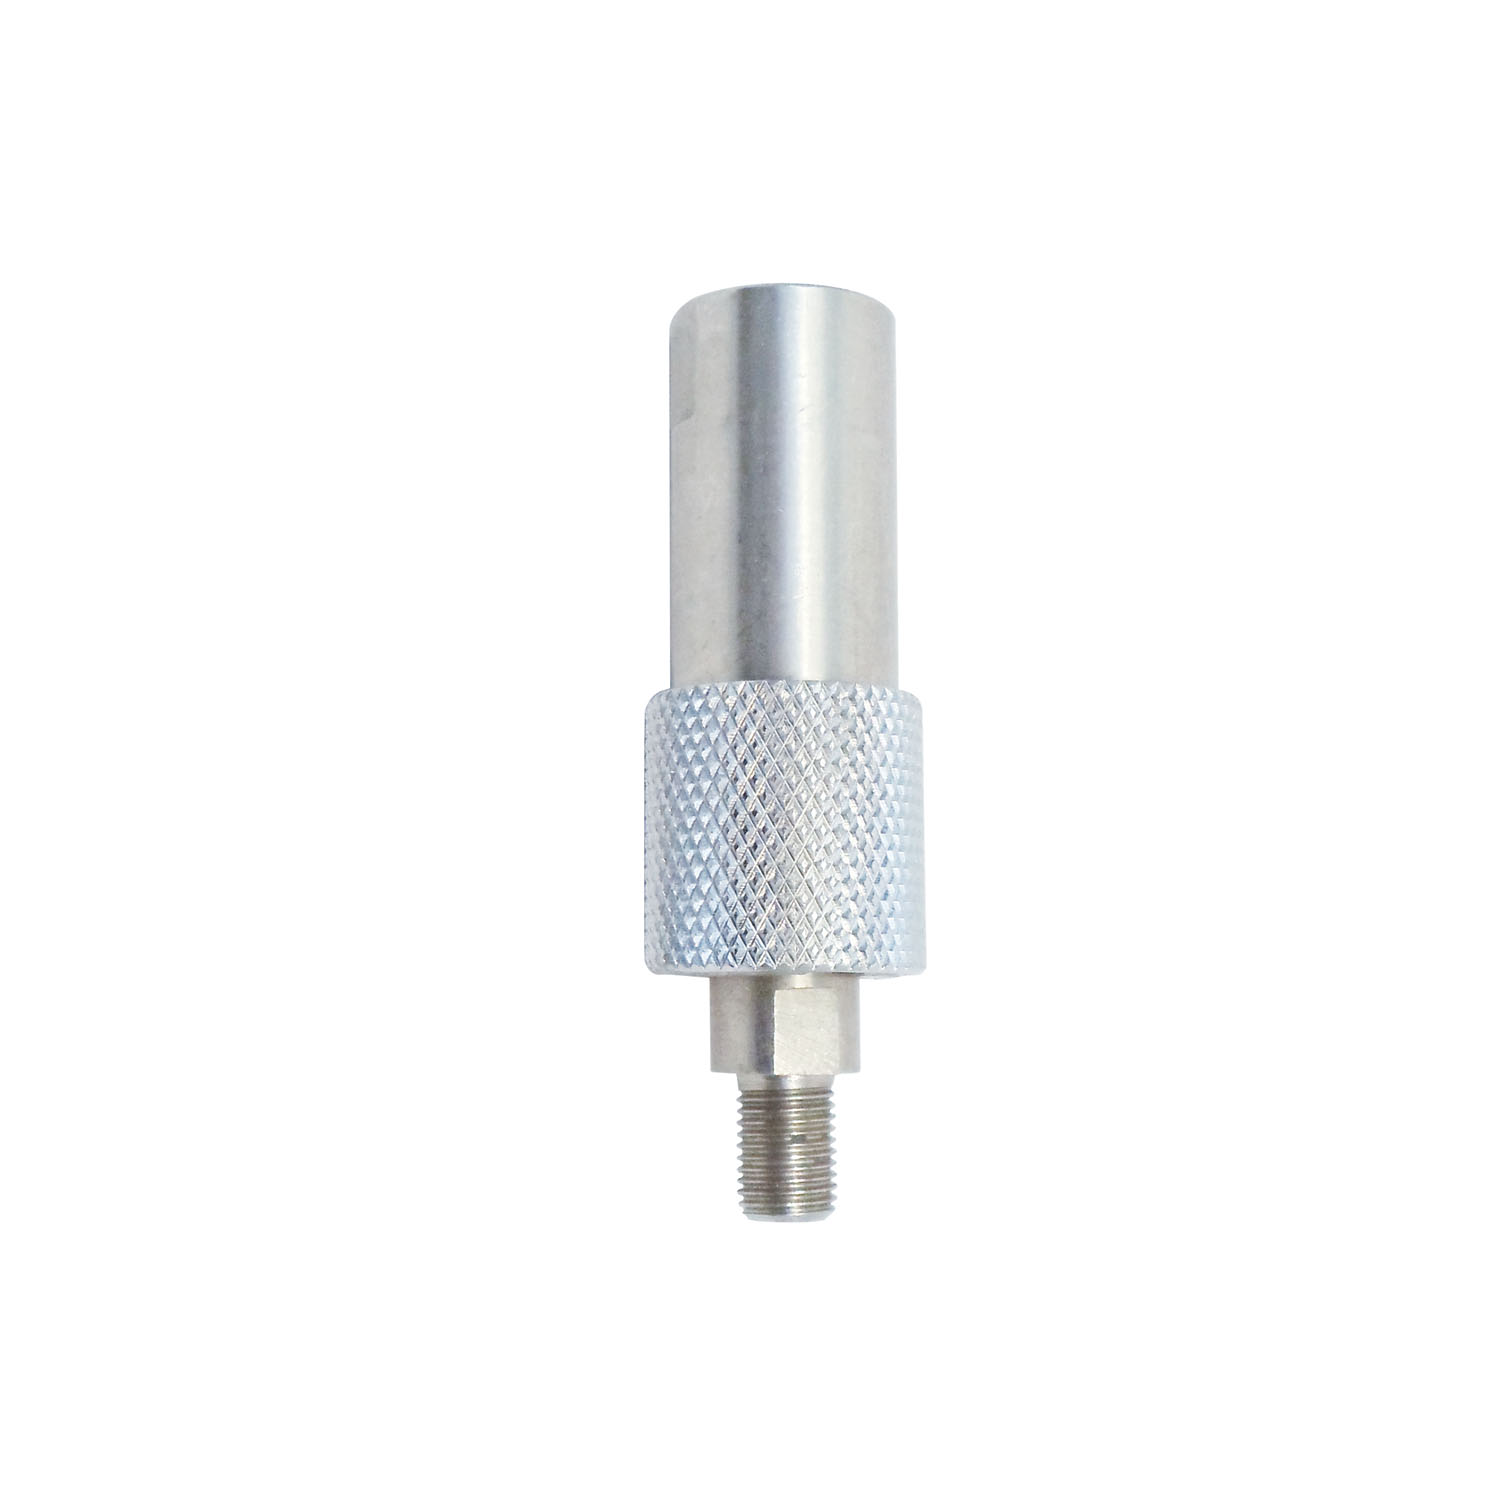 Workman - Heavy Duty 3/8"X24" Threaded Antenna Quick Disconnect With Internal Locking Pin